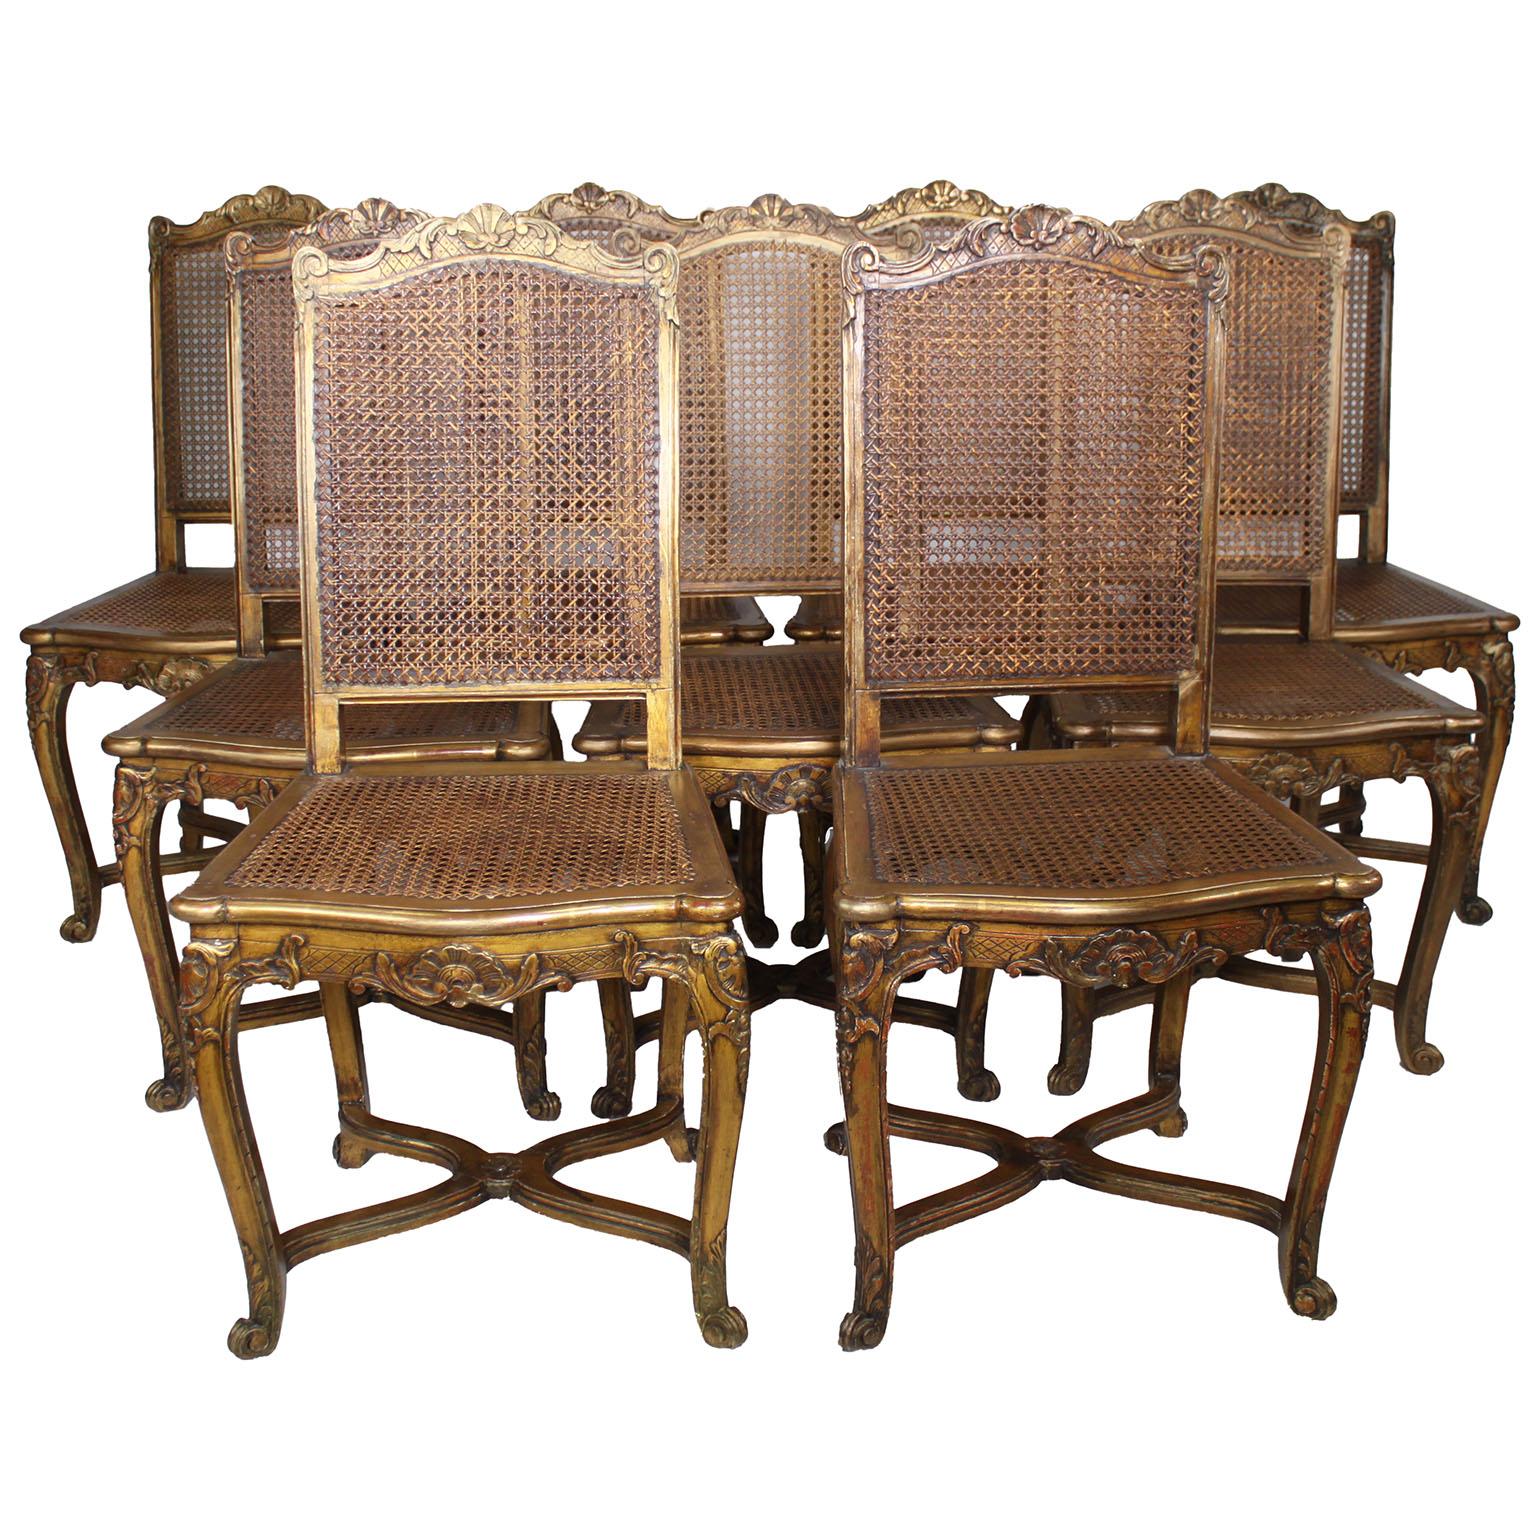 A Charming Set of Nine French 19th-20th Century Louis XV Style Gildwood Carved Opera-Concert Side Chairs. The delicately carved frames feature intricate motifs including seashells, scrolls, acanthus leaves, and flowers, elegantly supported by four